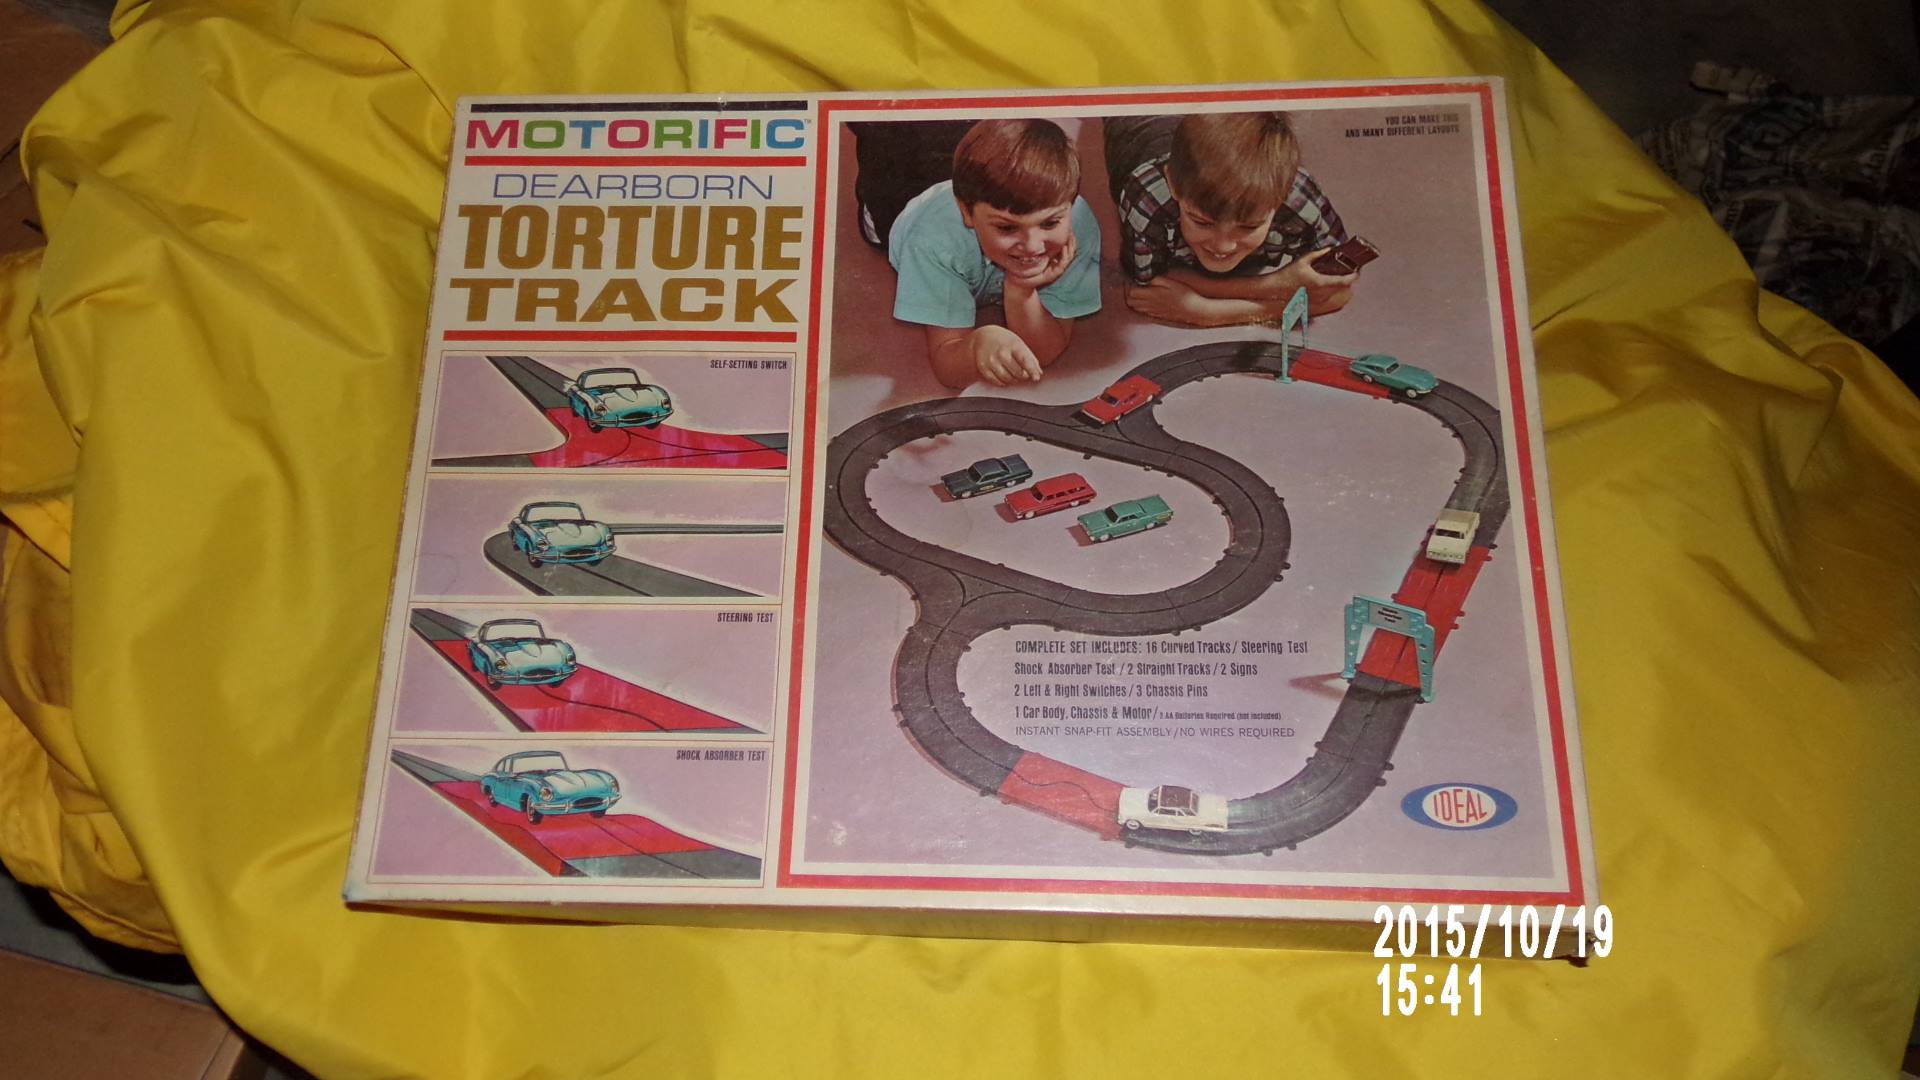 Boys of the 80s - Switch Steering Test Complete Set Includes 16 Curved Tracks Steering